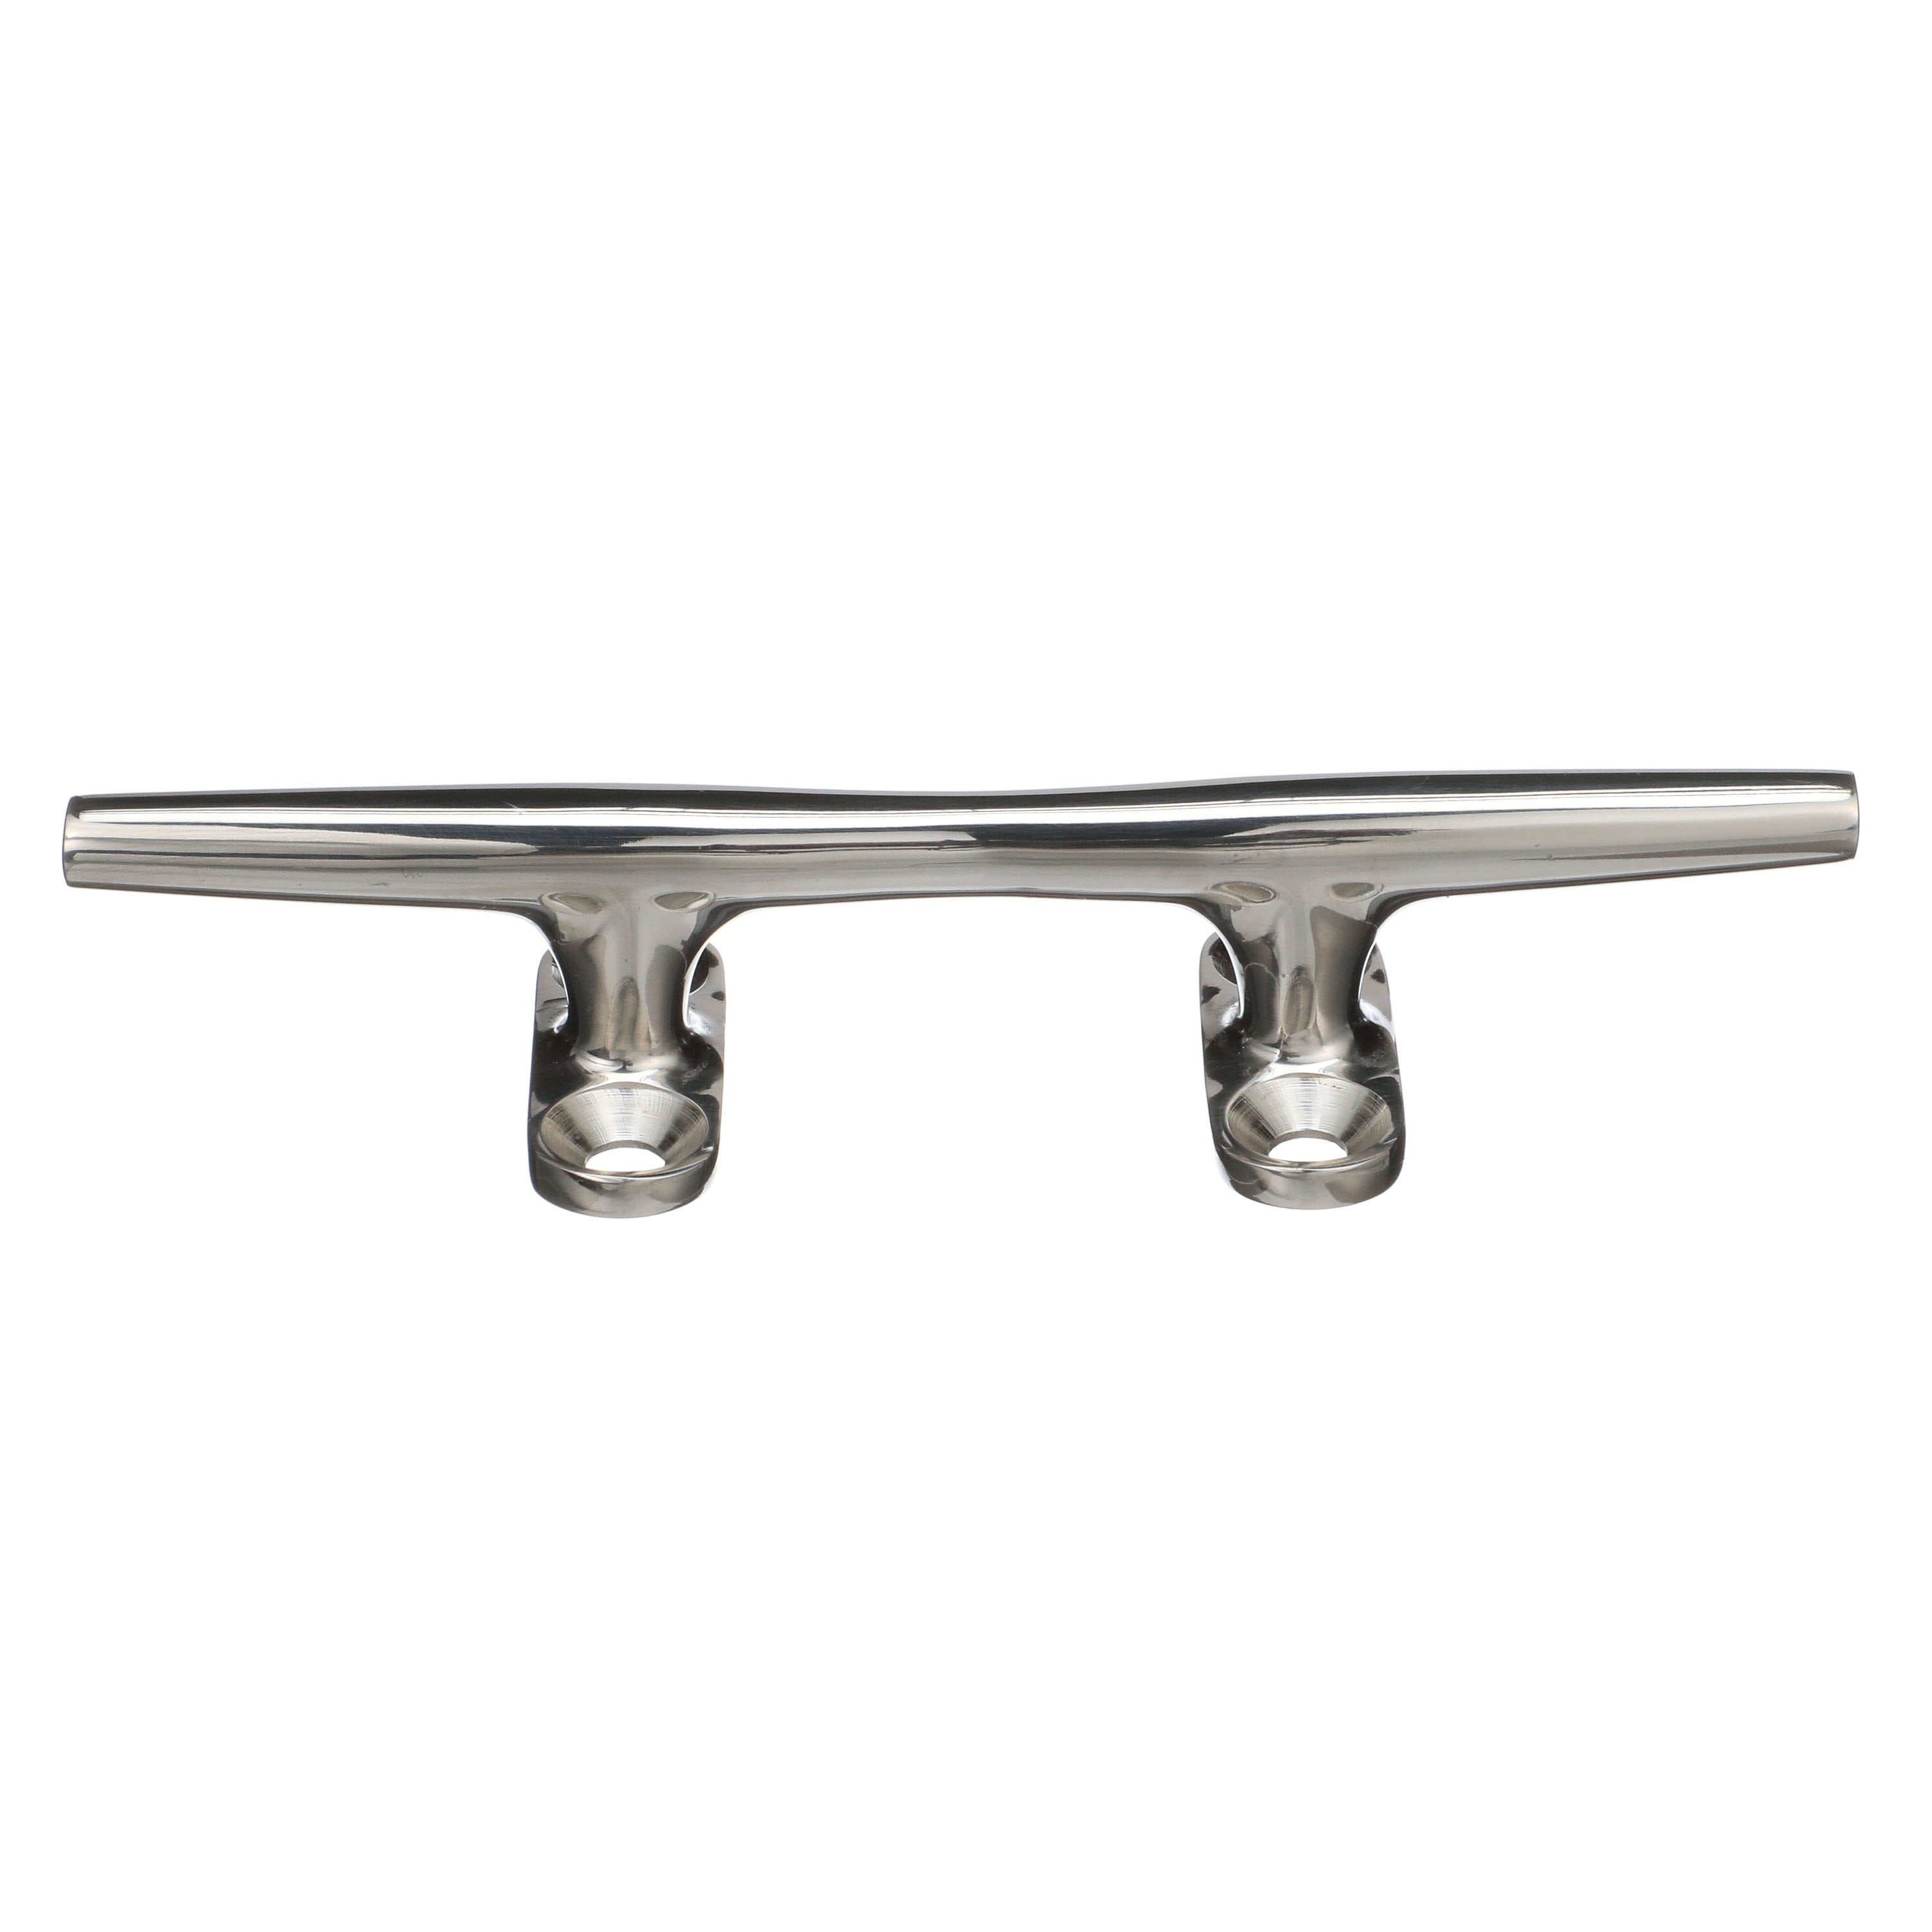 MARINE BOAT STAINLESS STEEL 10 INCH BOAT HERRESHOFF HOLLOW BASE CLEAT